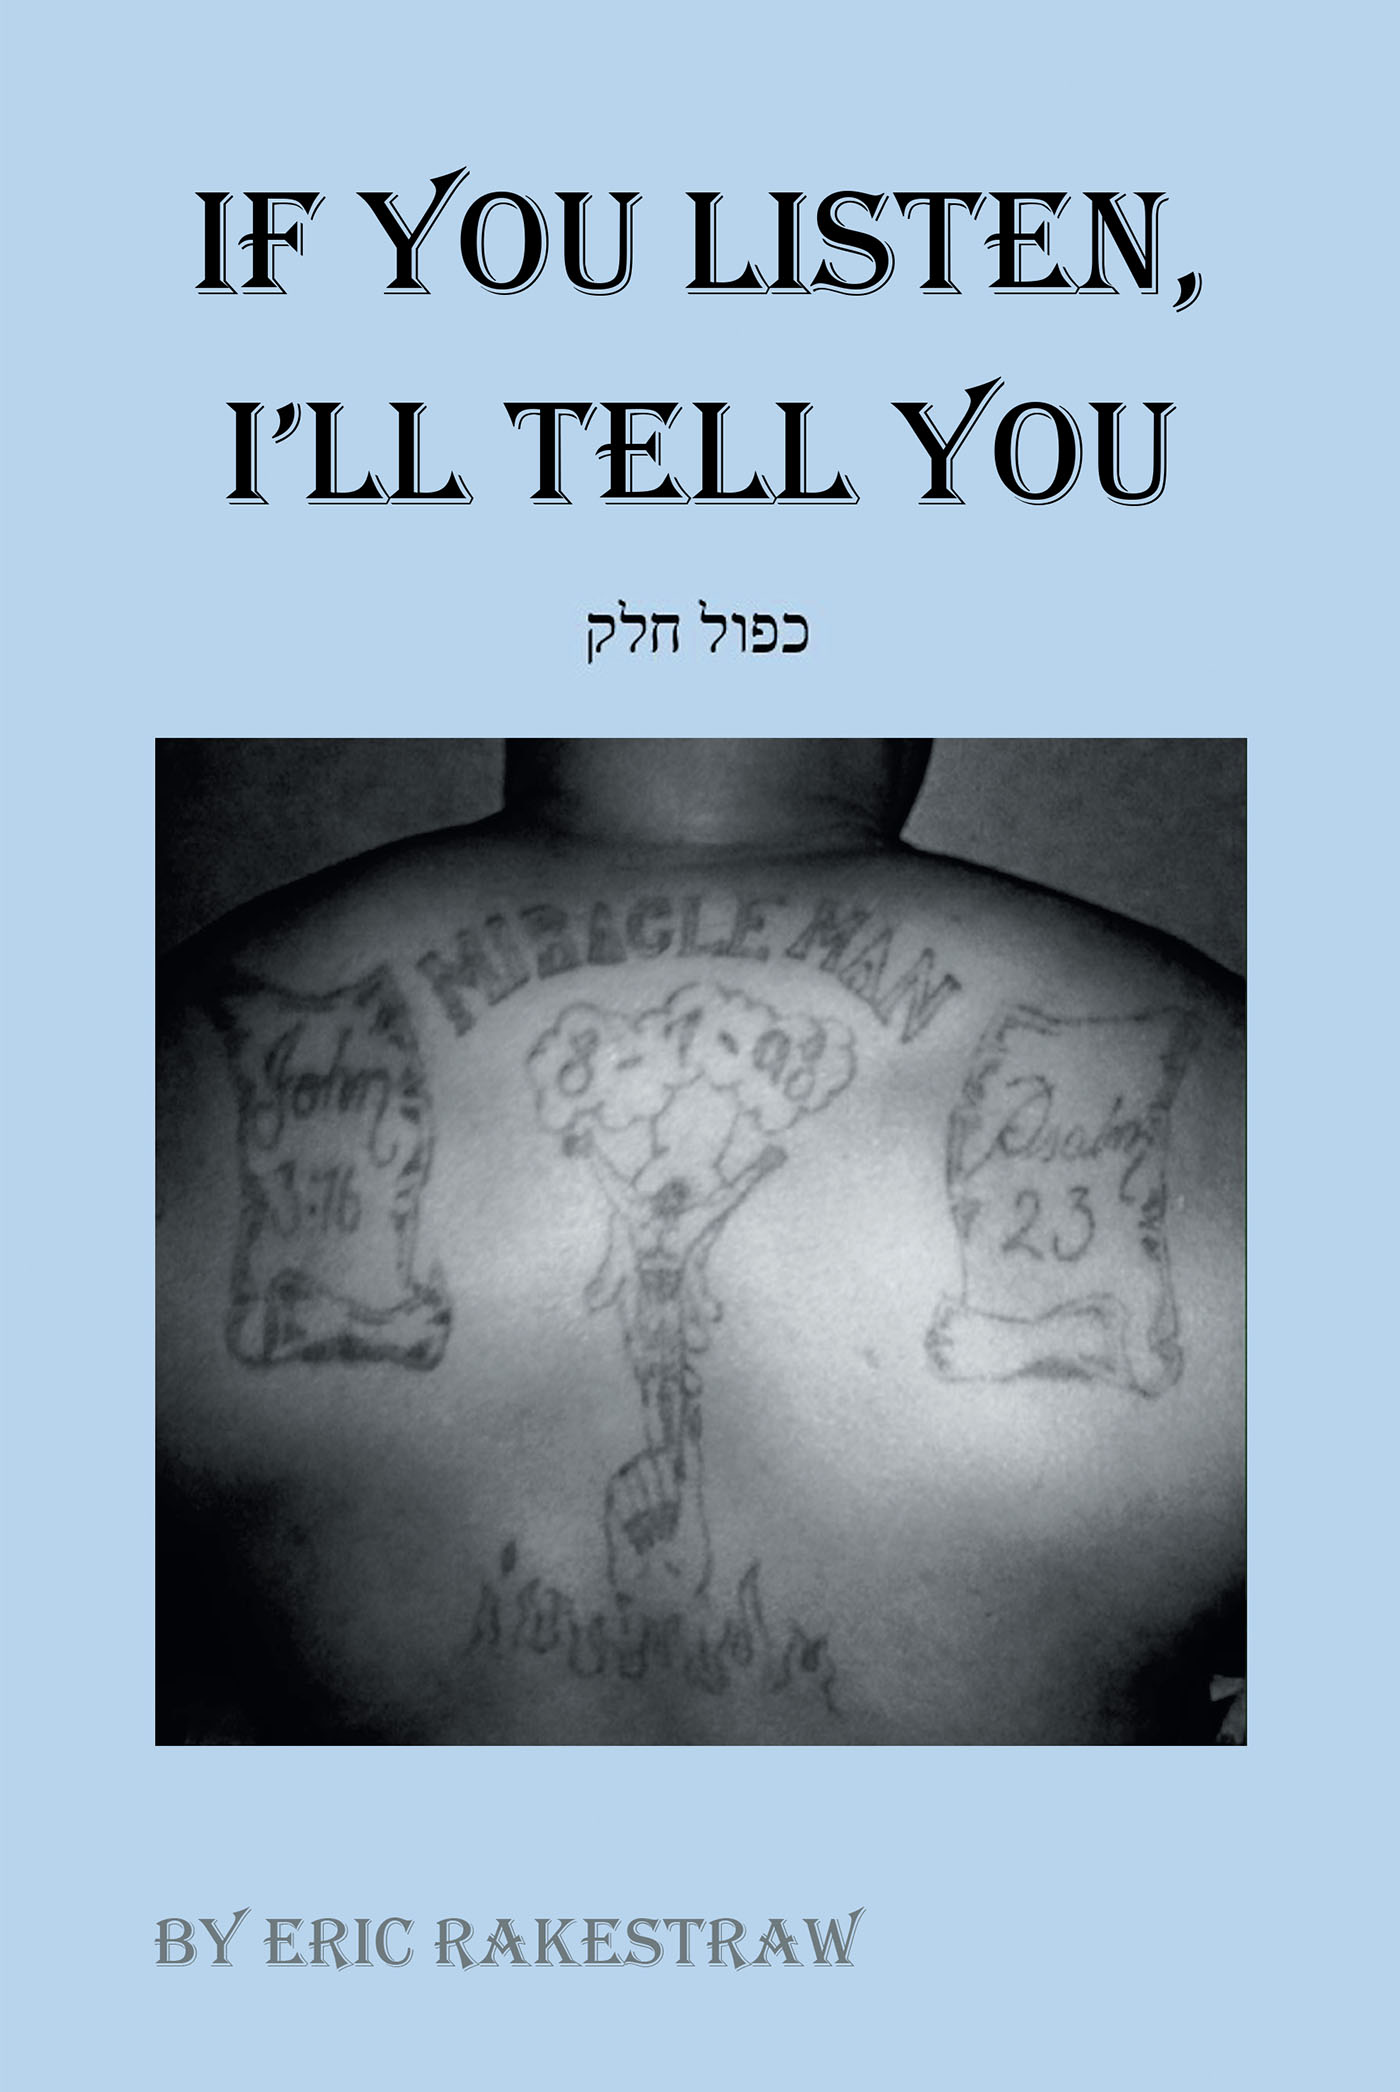 Author Eric Rakestraw’s New Book, “If You Listen, I'll Tell You: חלק כפול,” Follows the Author's Fight to Return from the Brink After an Illness Leaves Him Comatose